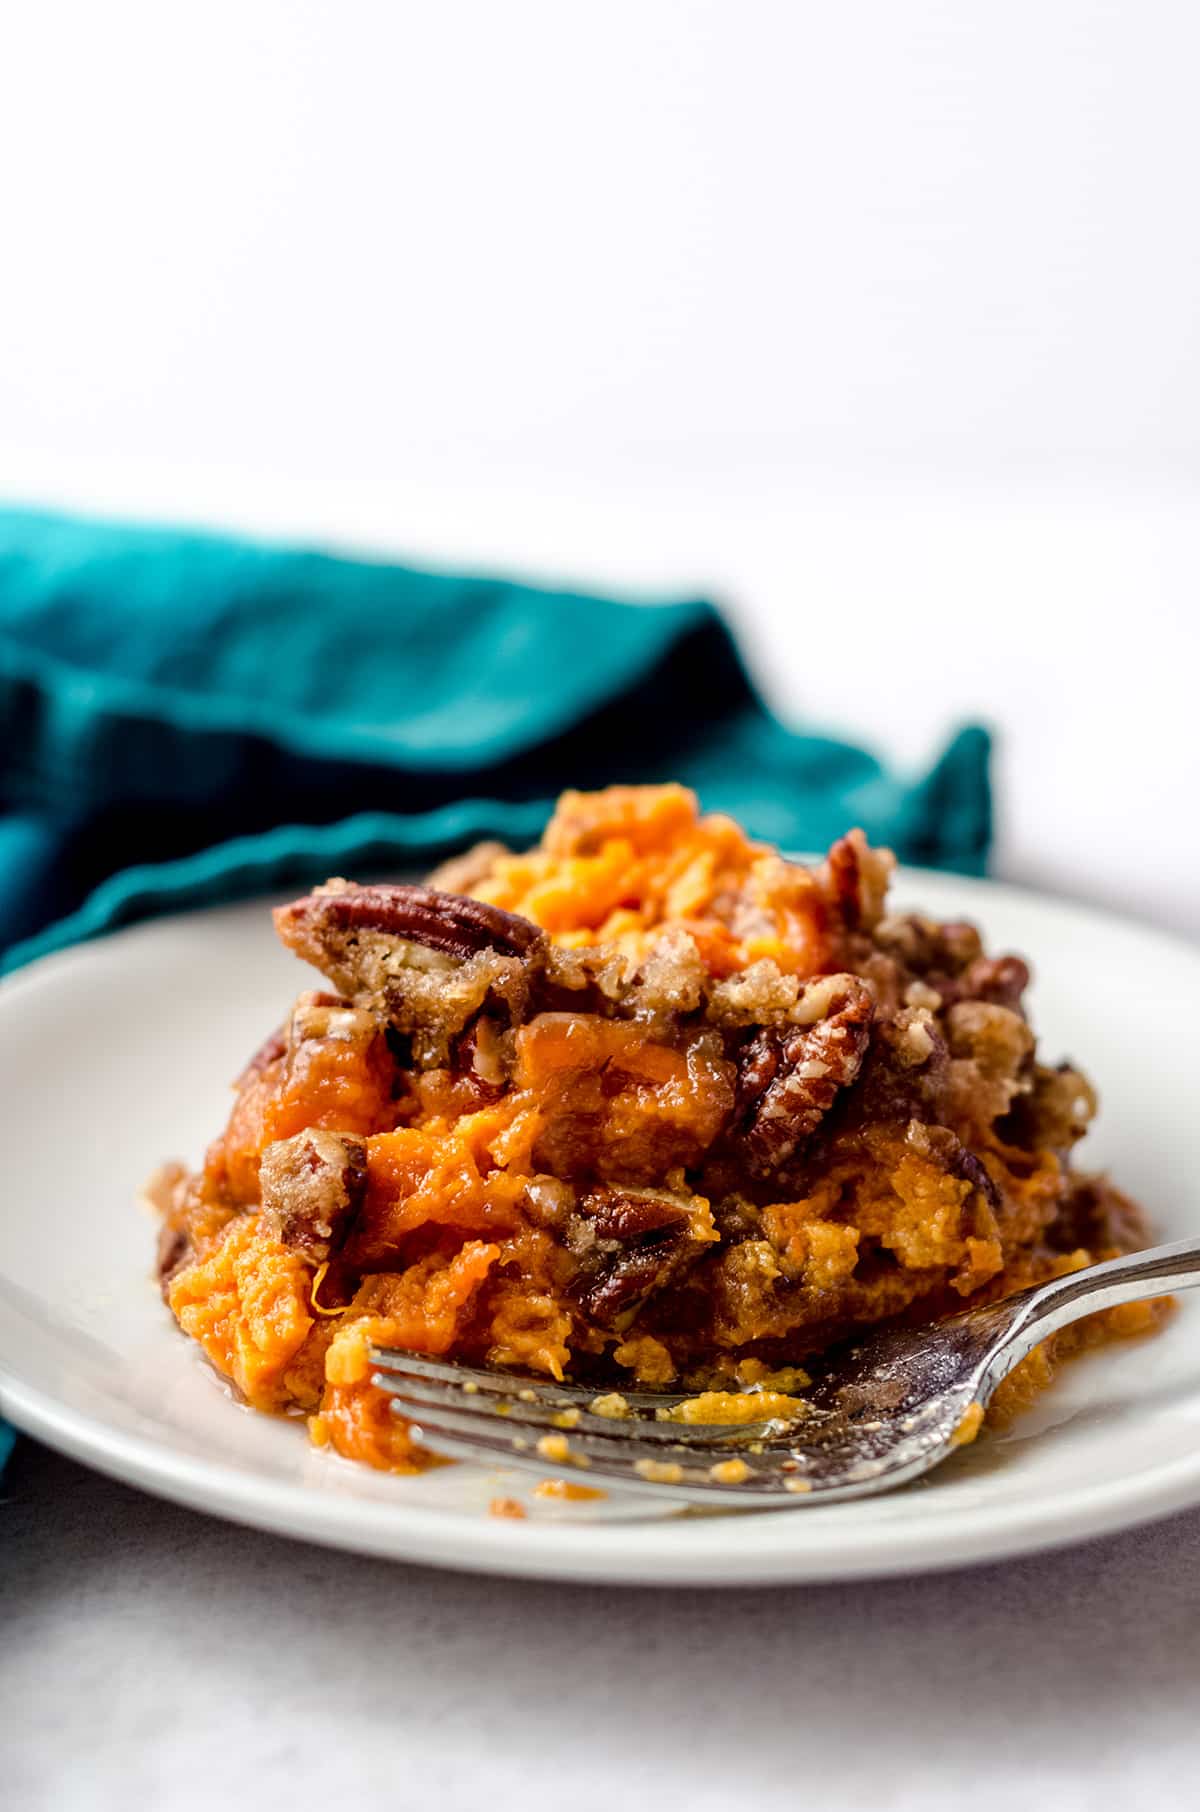 A serving of sweet potato casserole topped with pecans.